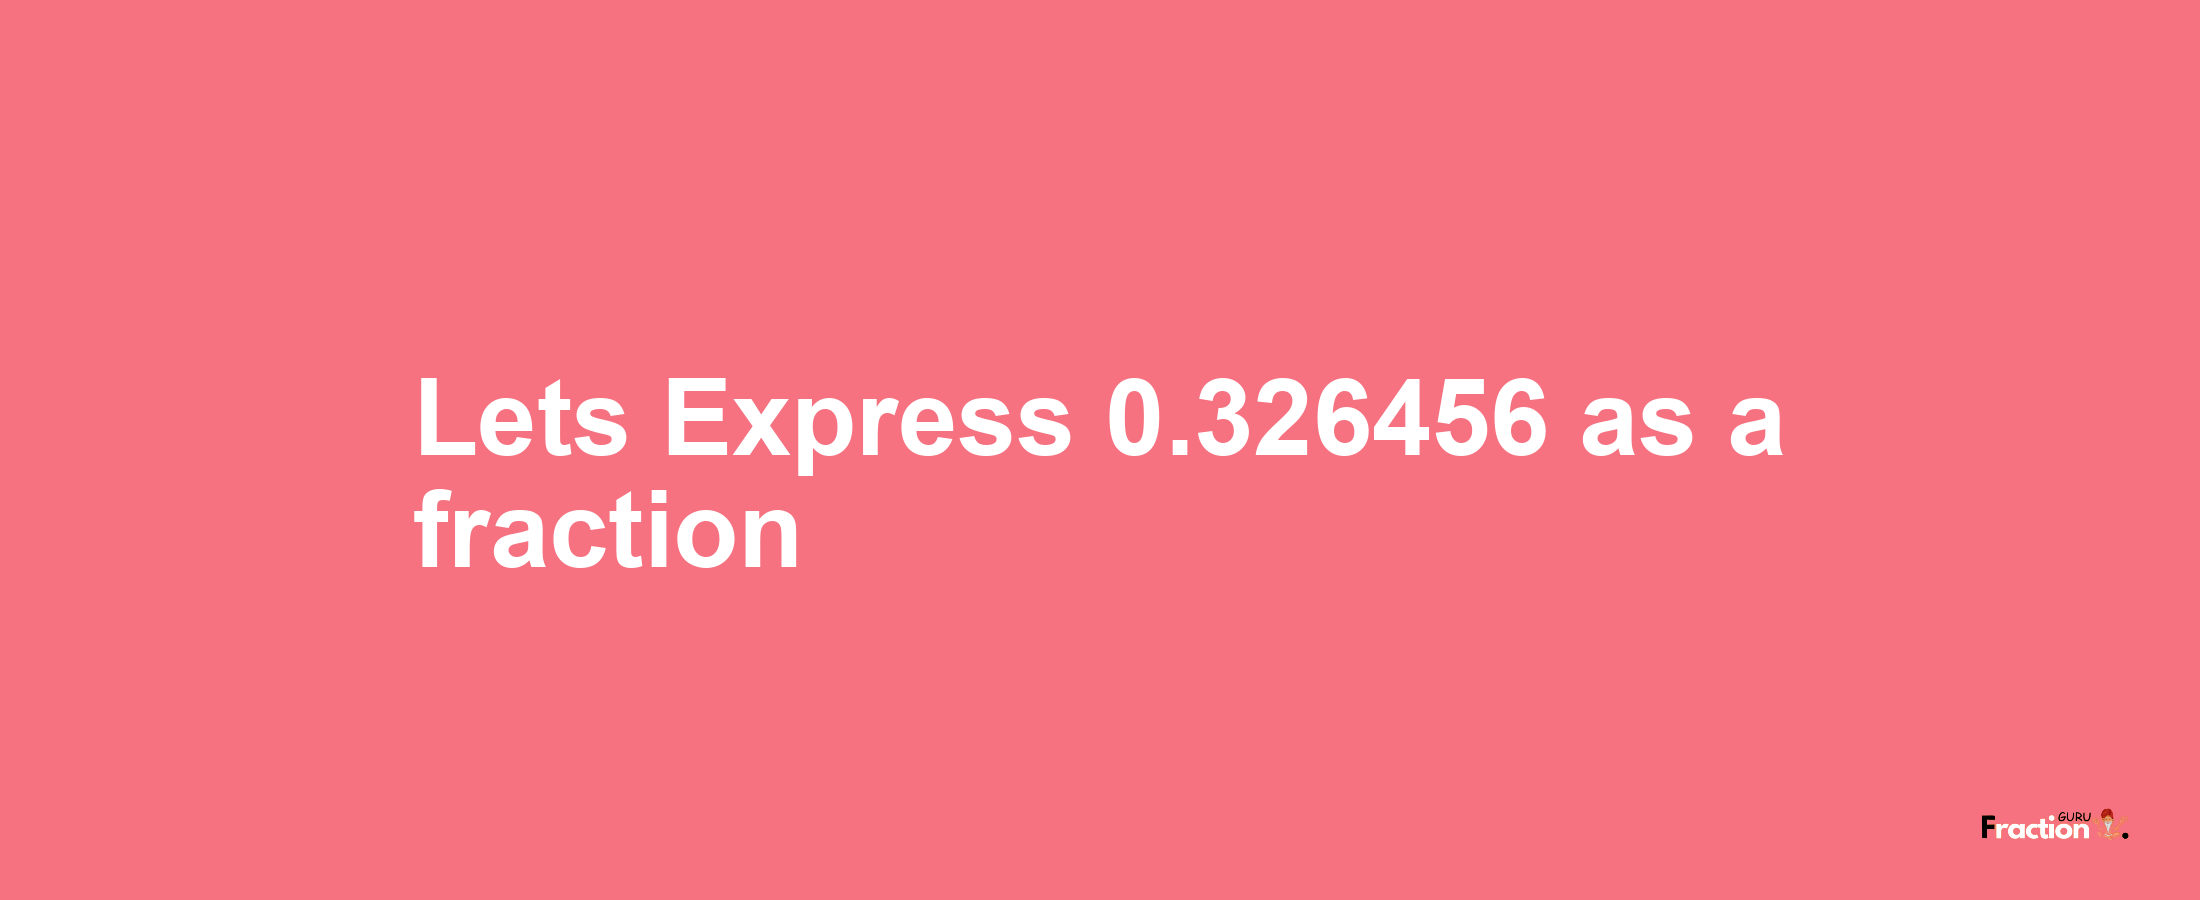 Lets Express 0.326456 as afraction